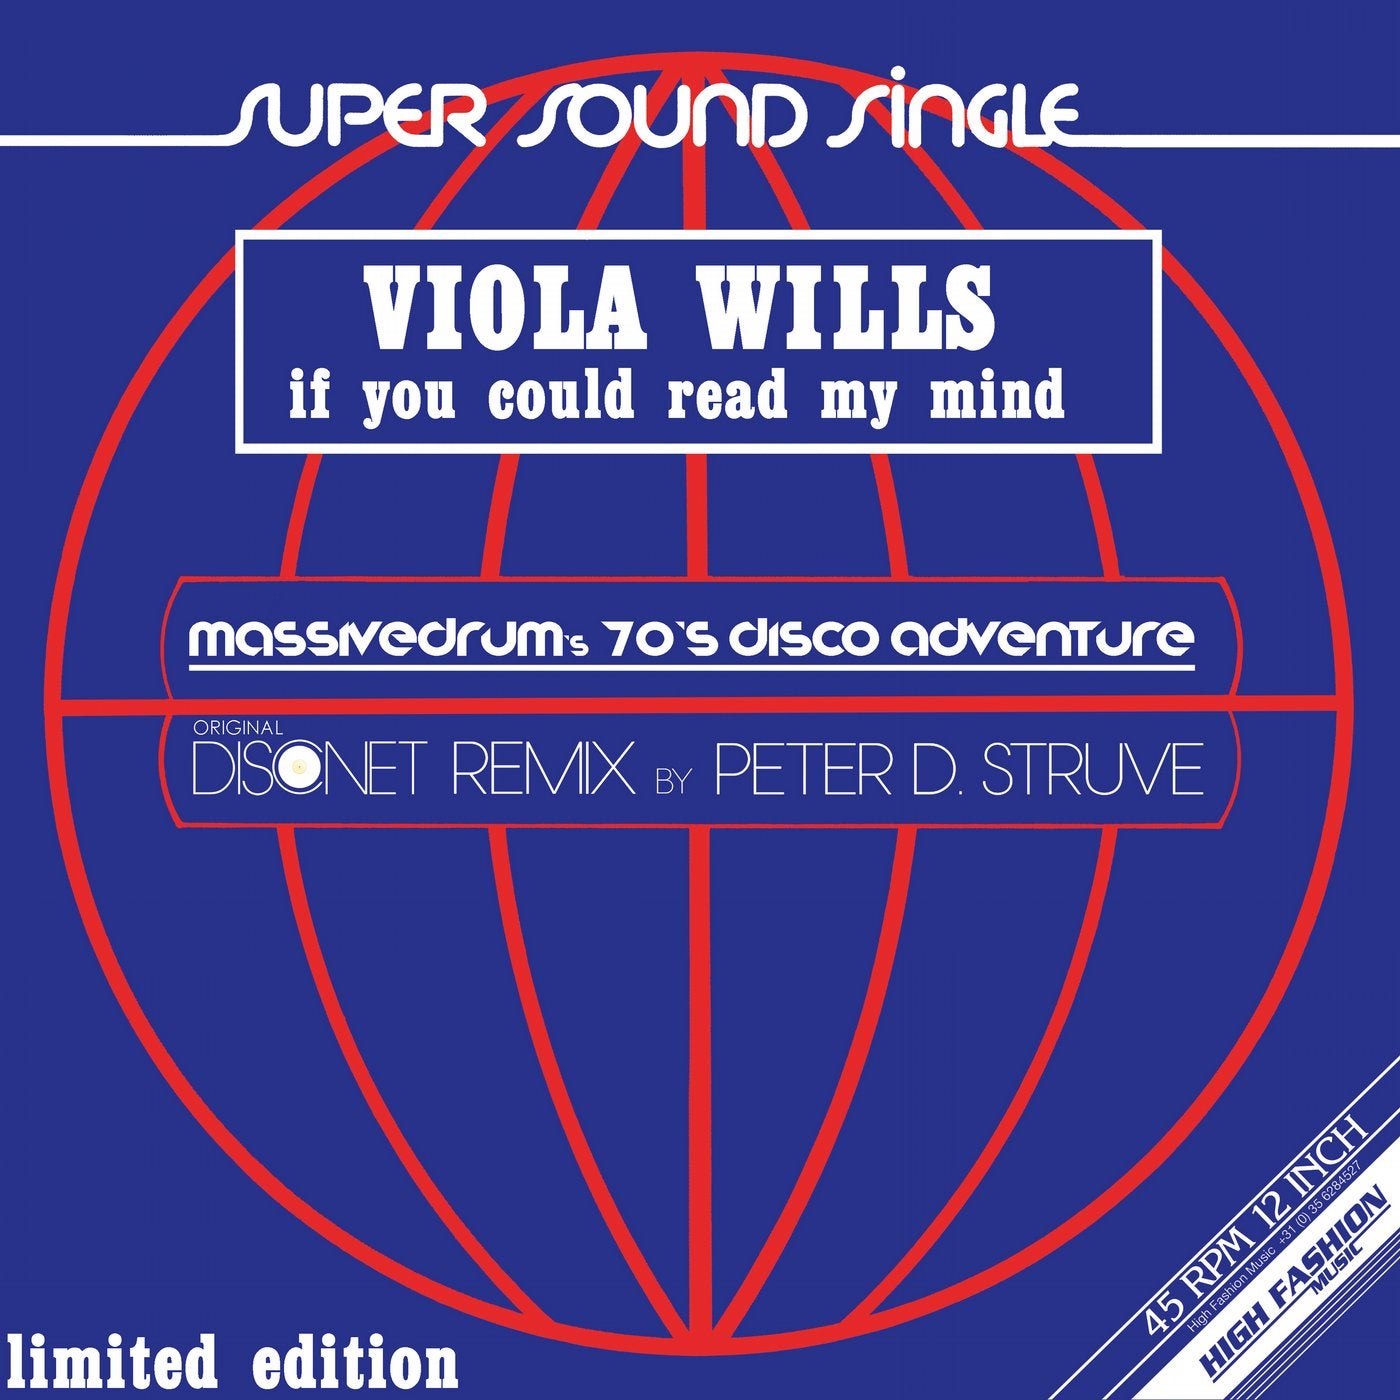 Mind special 18. Viola wills. If you could read my Mind. Viola wills CD albums. Viola wills poster.